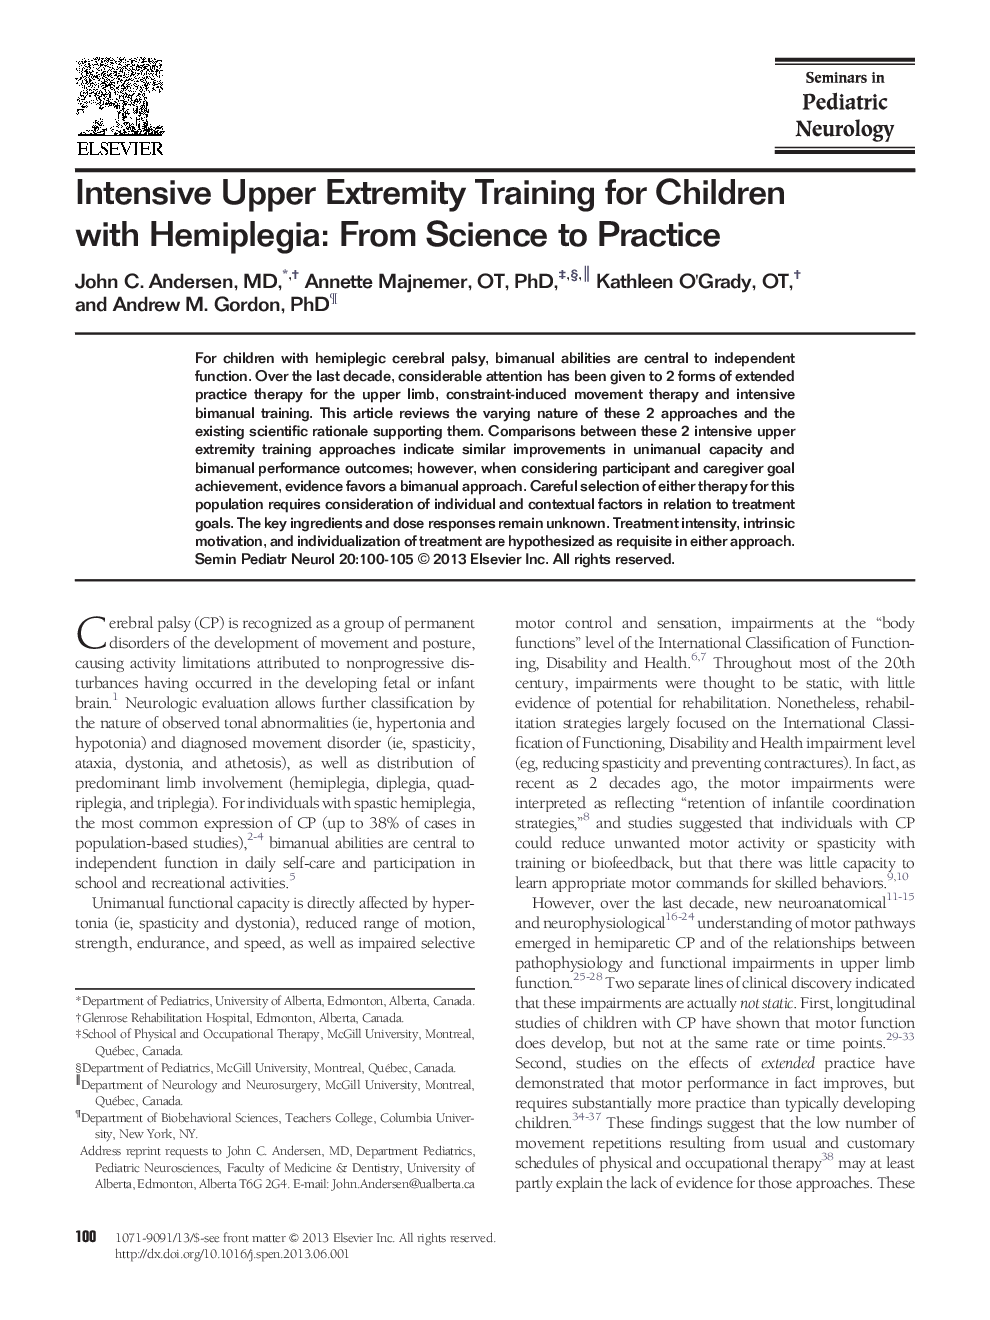 Intensive Upper Extremity Training for Children with Hemiplegia: From Science to Practice